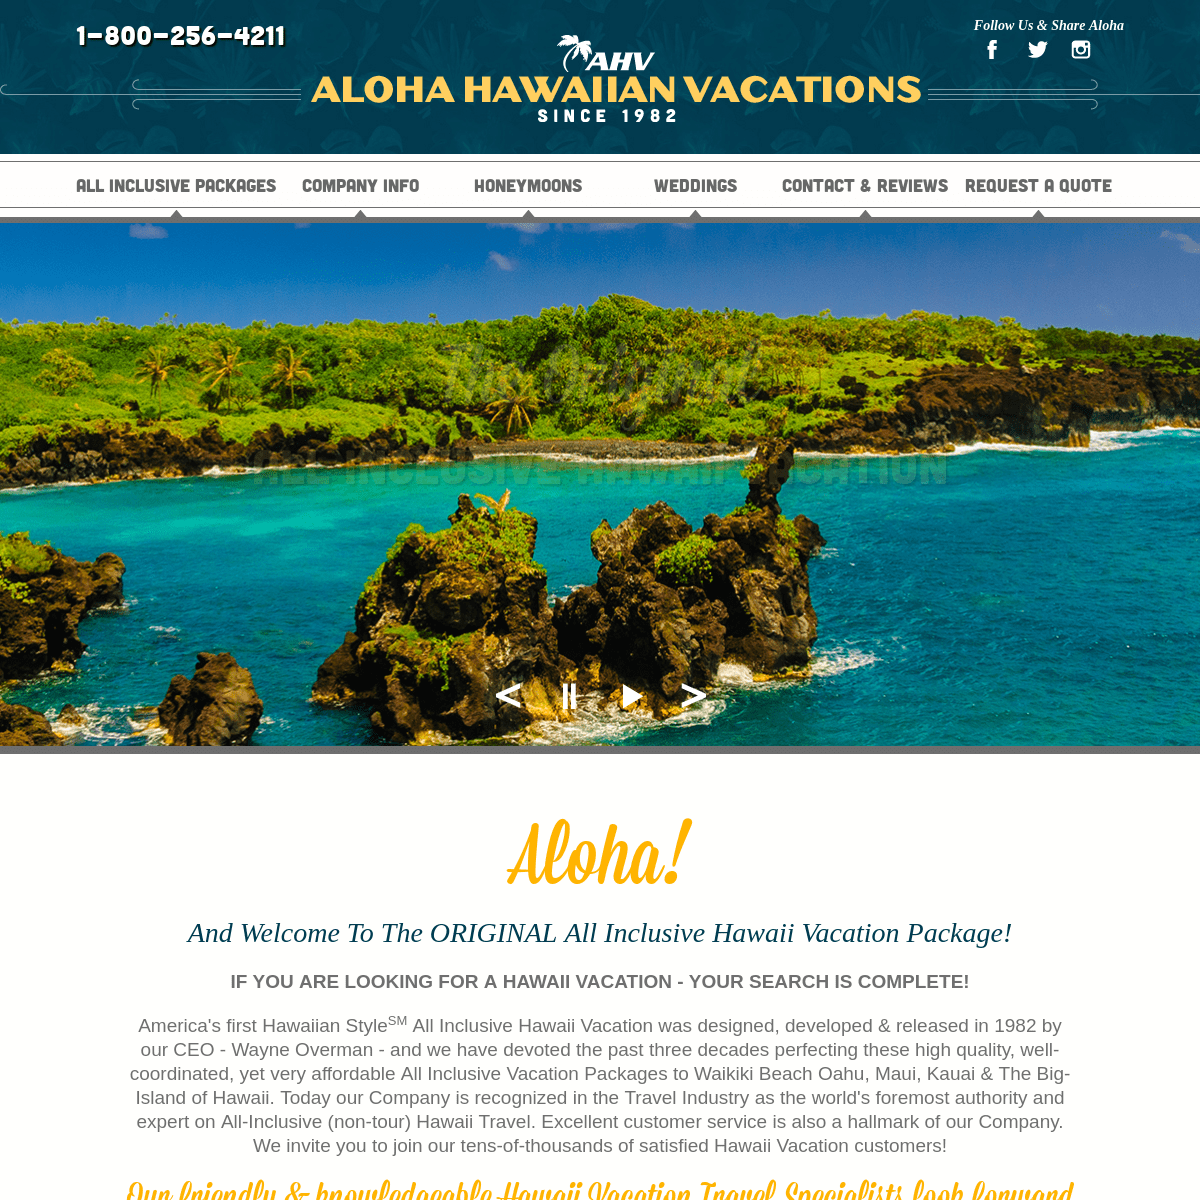 HAWAII ALL INCLUSIVE: INCLUSIVE HAWAII VACATION PACKAGE SPECIALIST.